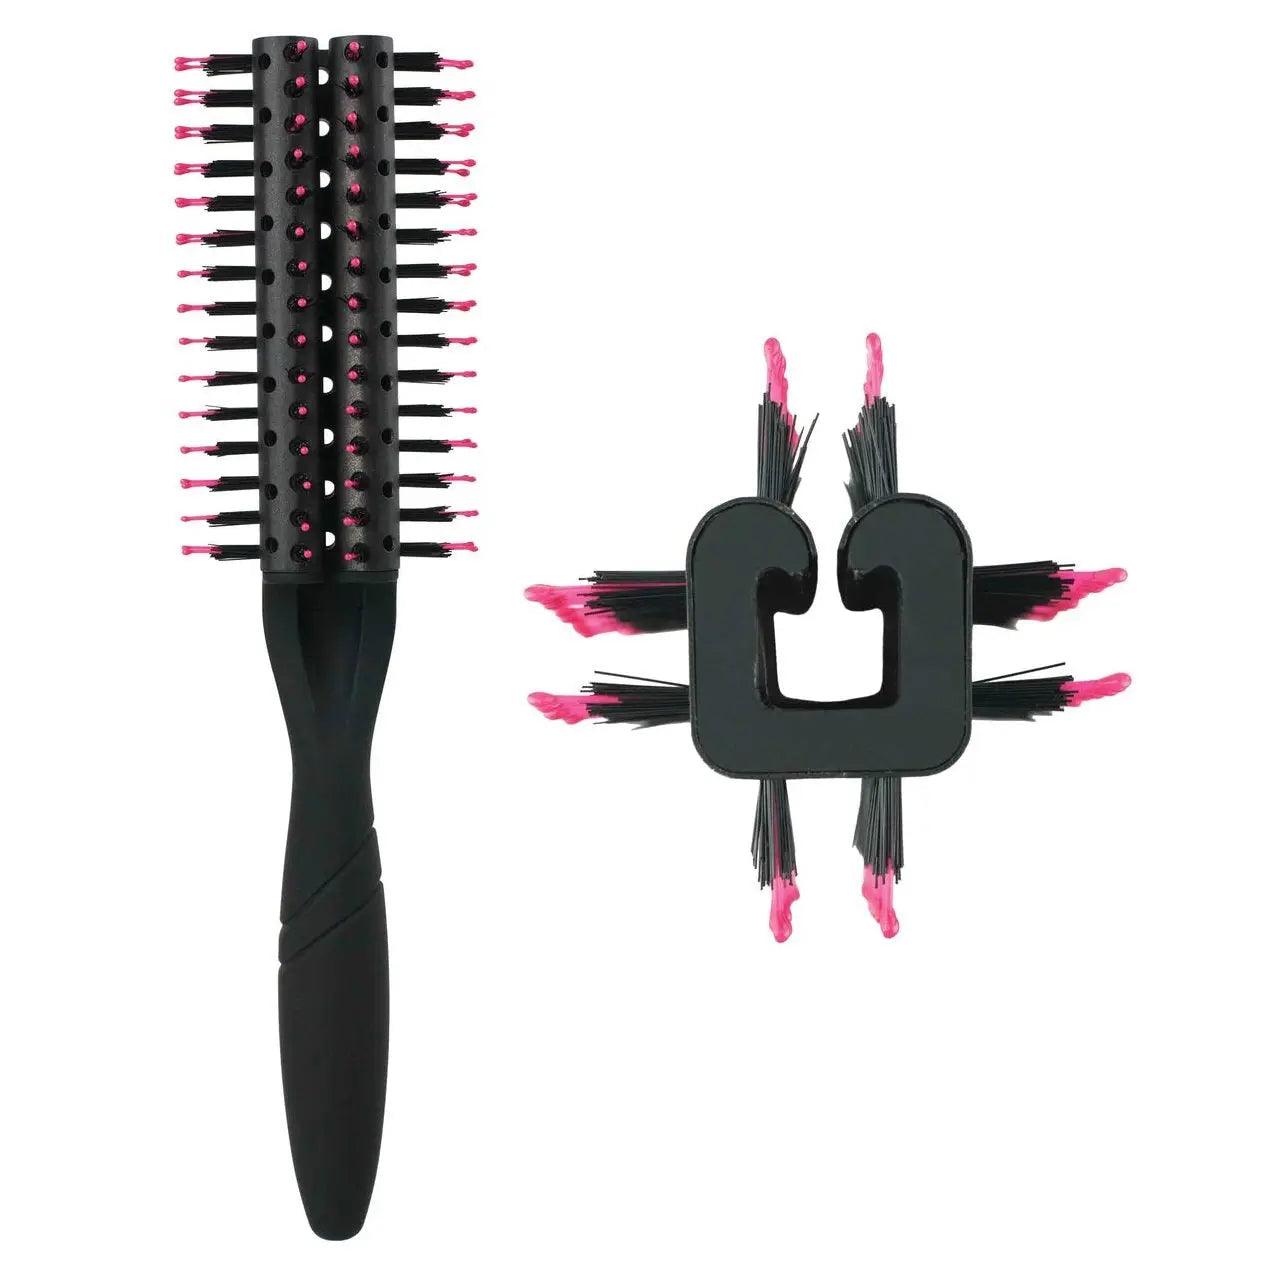 WET BRUSH PRO FAST DRY ROUND BRUSH - SQUARE Wet Brush Boutique Deauville